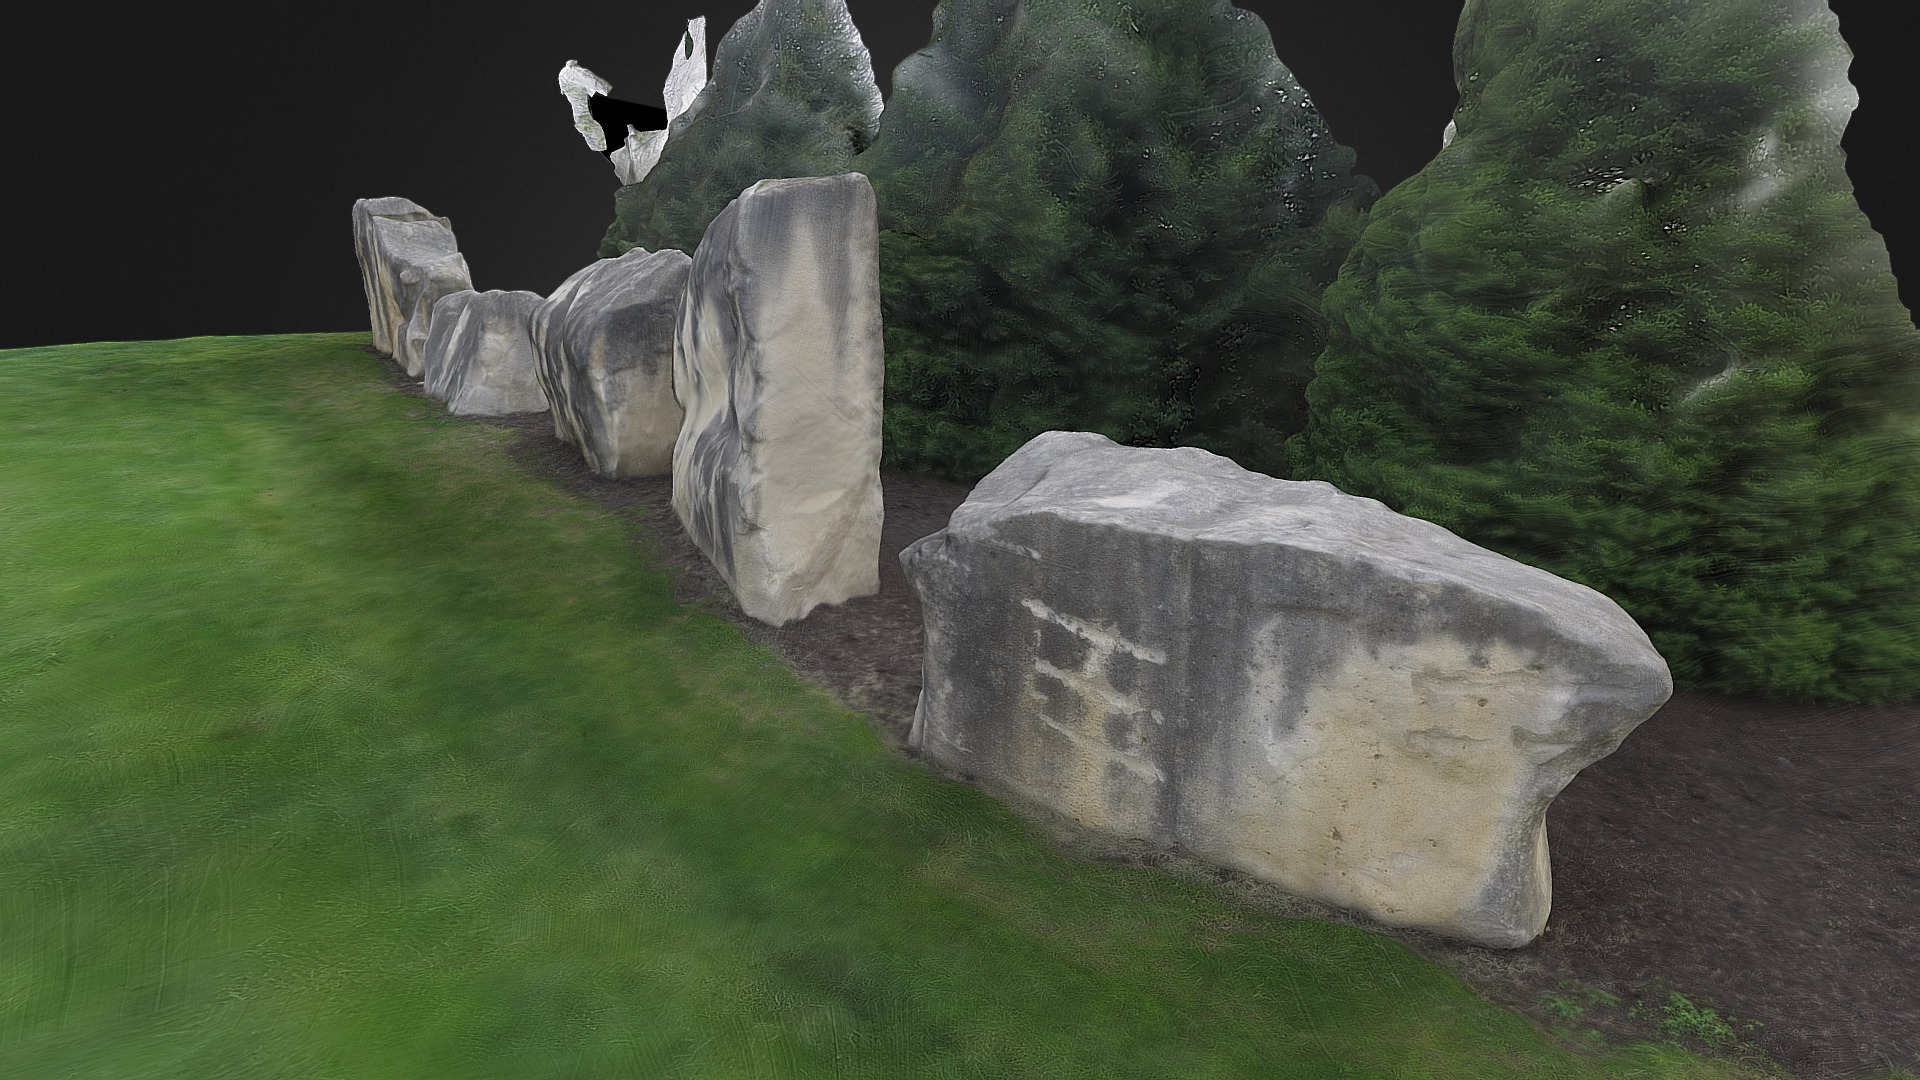 3D model Large decorative limestone - This is a 3D model of the Large decorative limestone. The 3D model is about a group of large rocks in a grassy area.